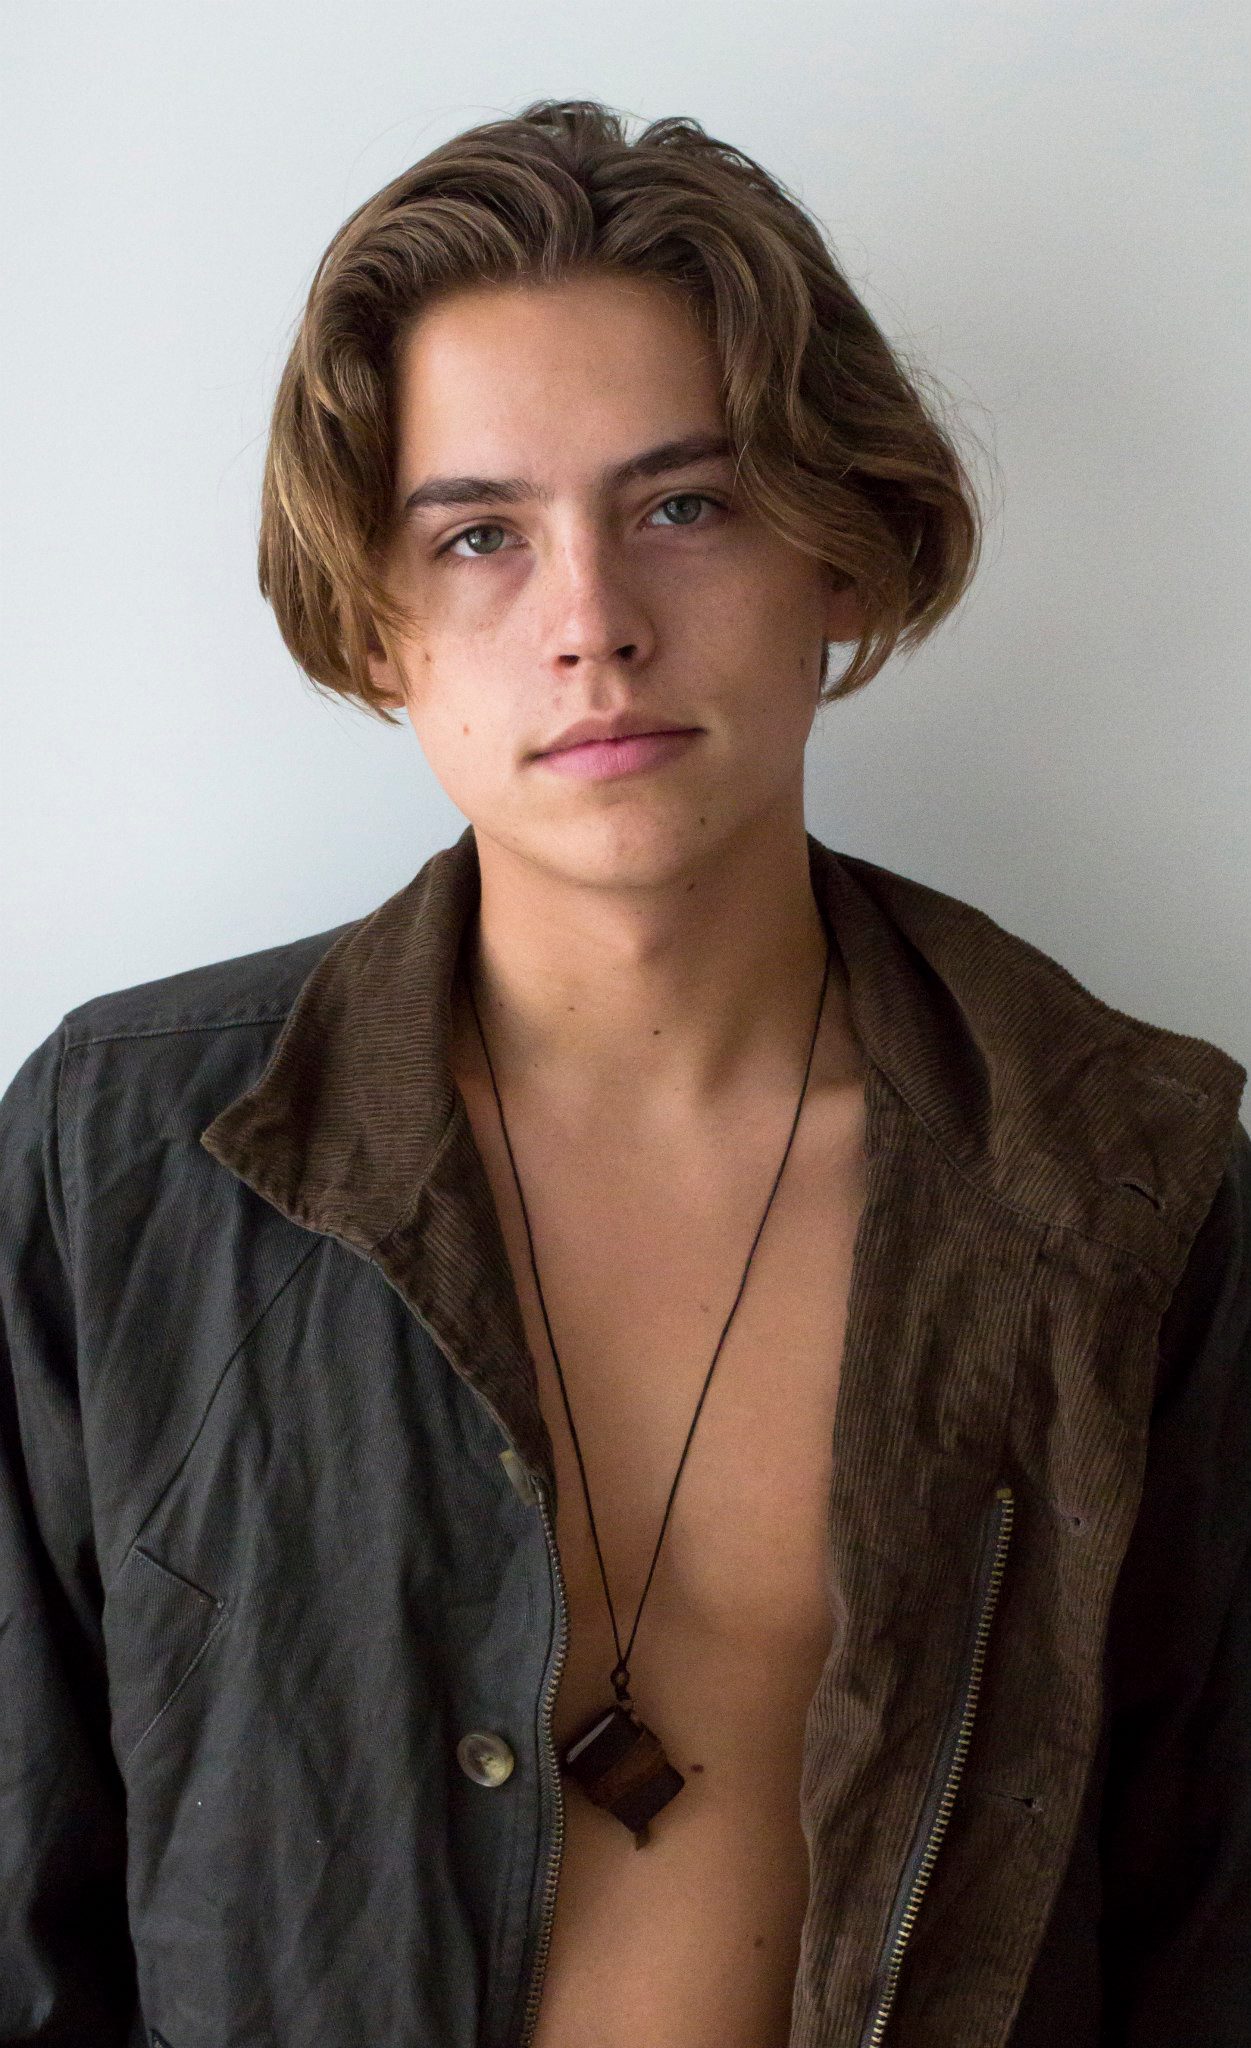 Cole Sprouse 2024 Hellblond Haar & unkonventionell Haarstil.
